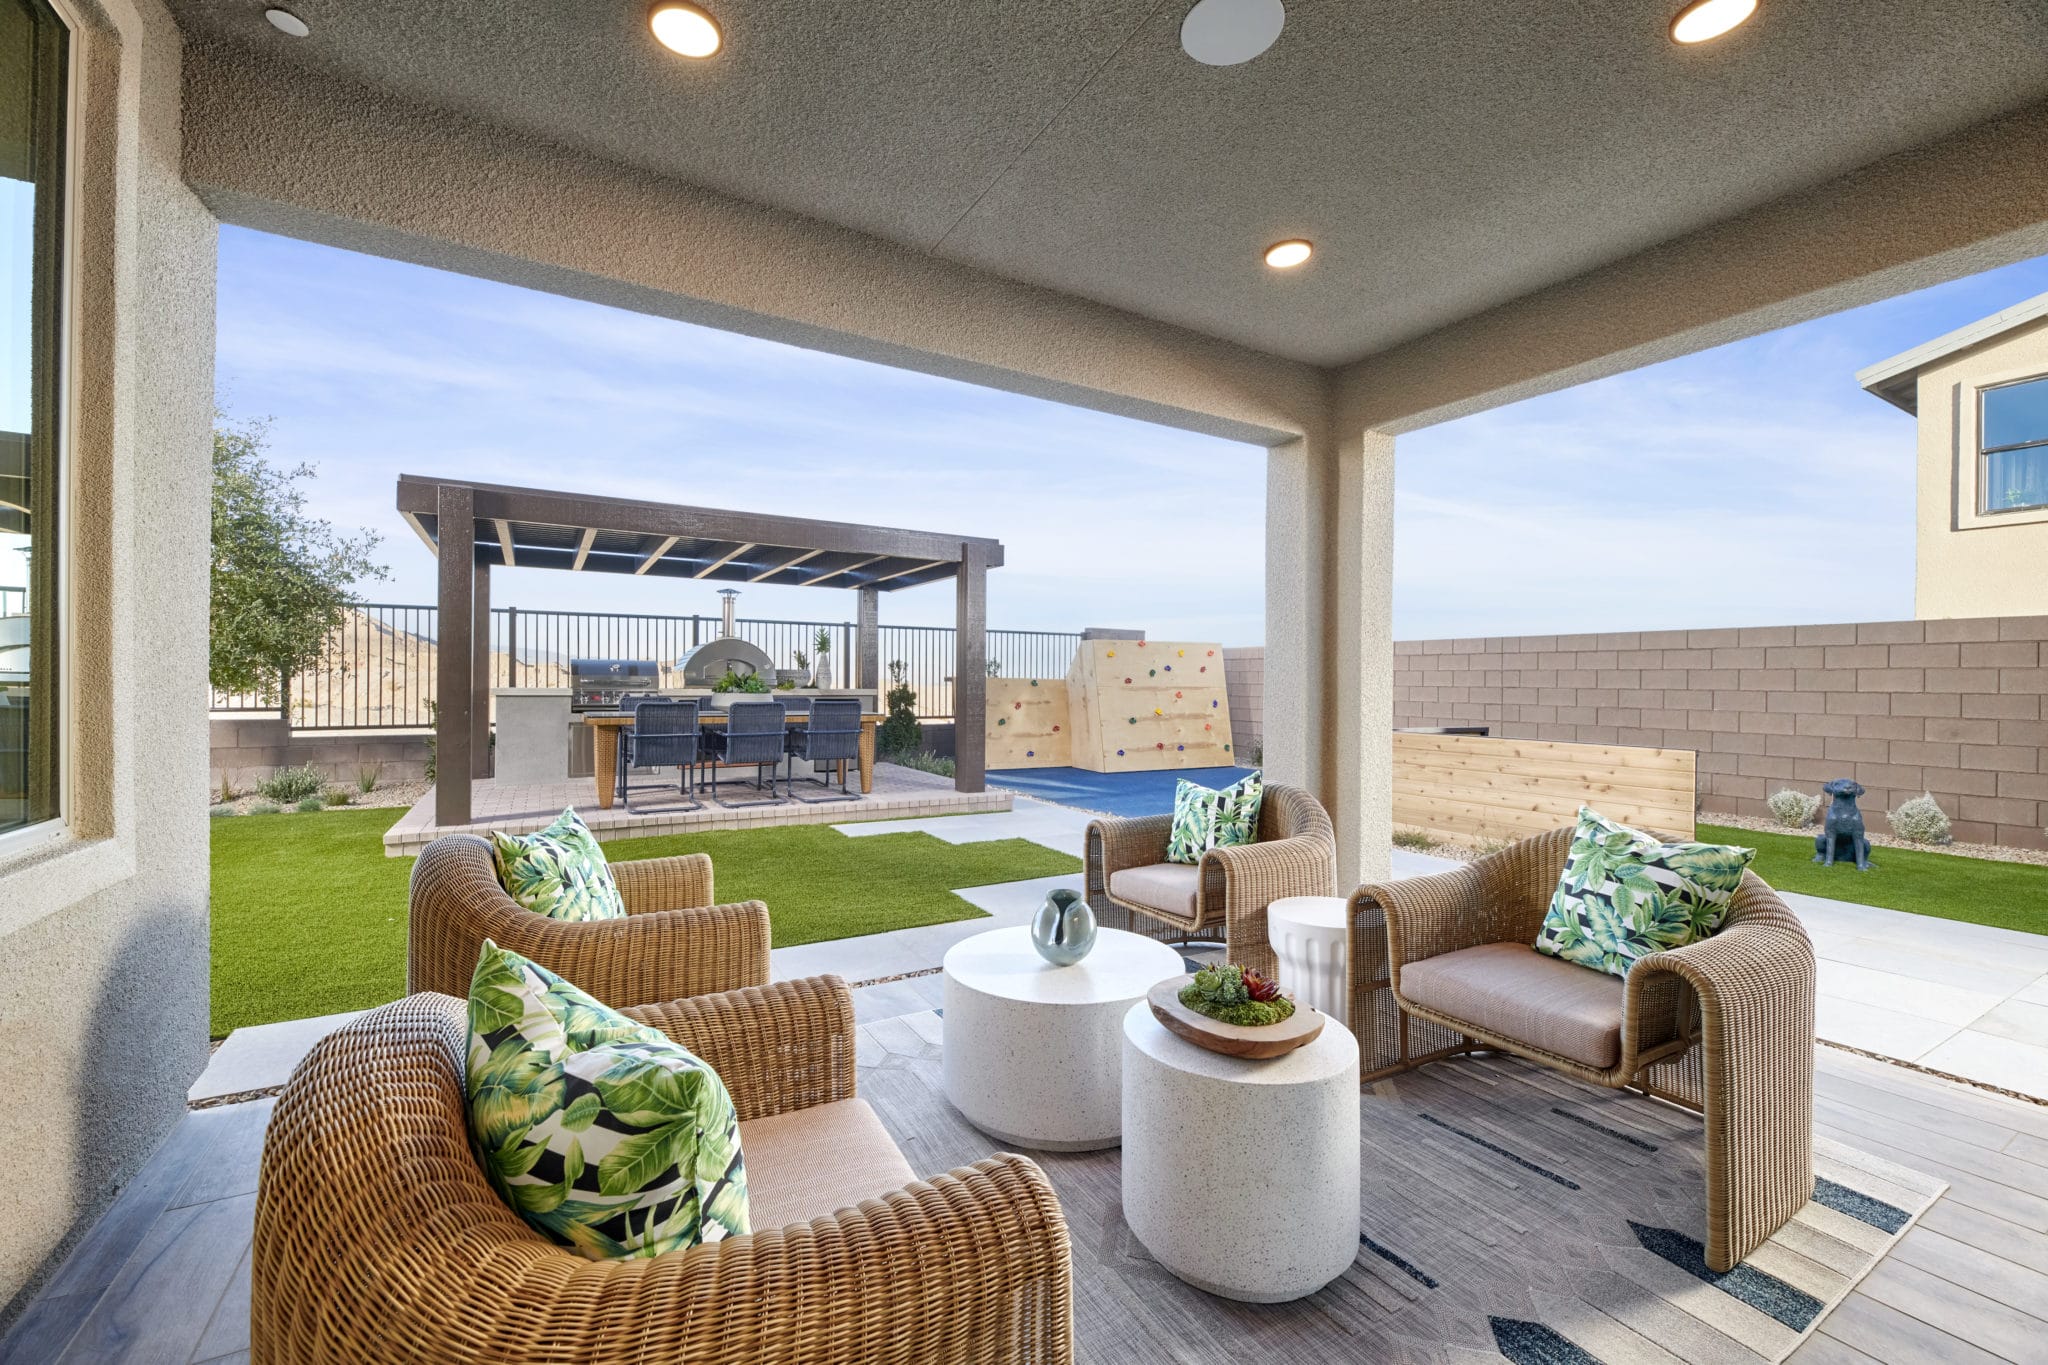 Backyard of Plan 3 at Kings Canyon by Tri Pointe Homes